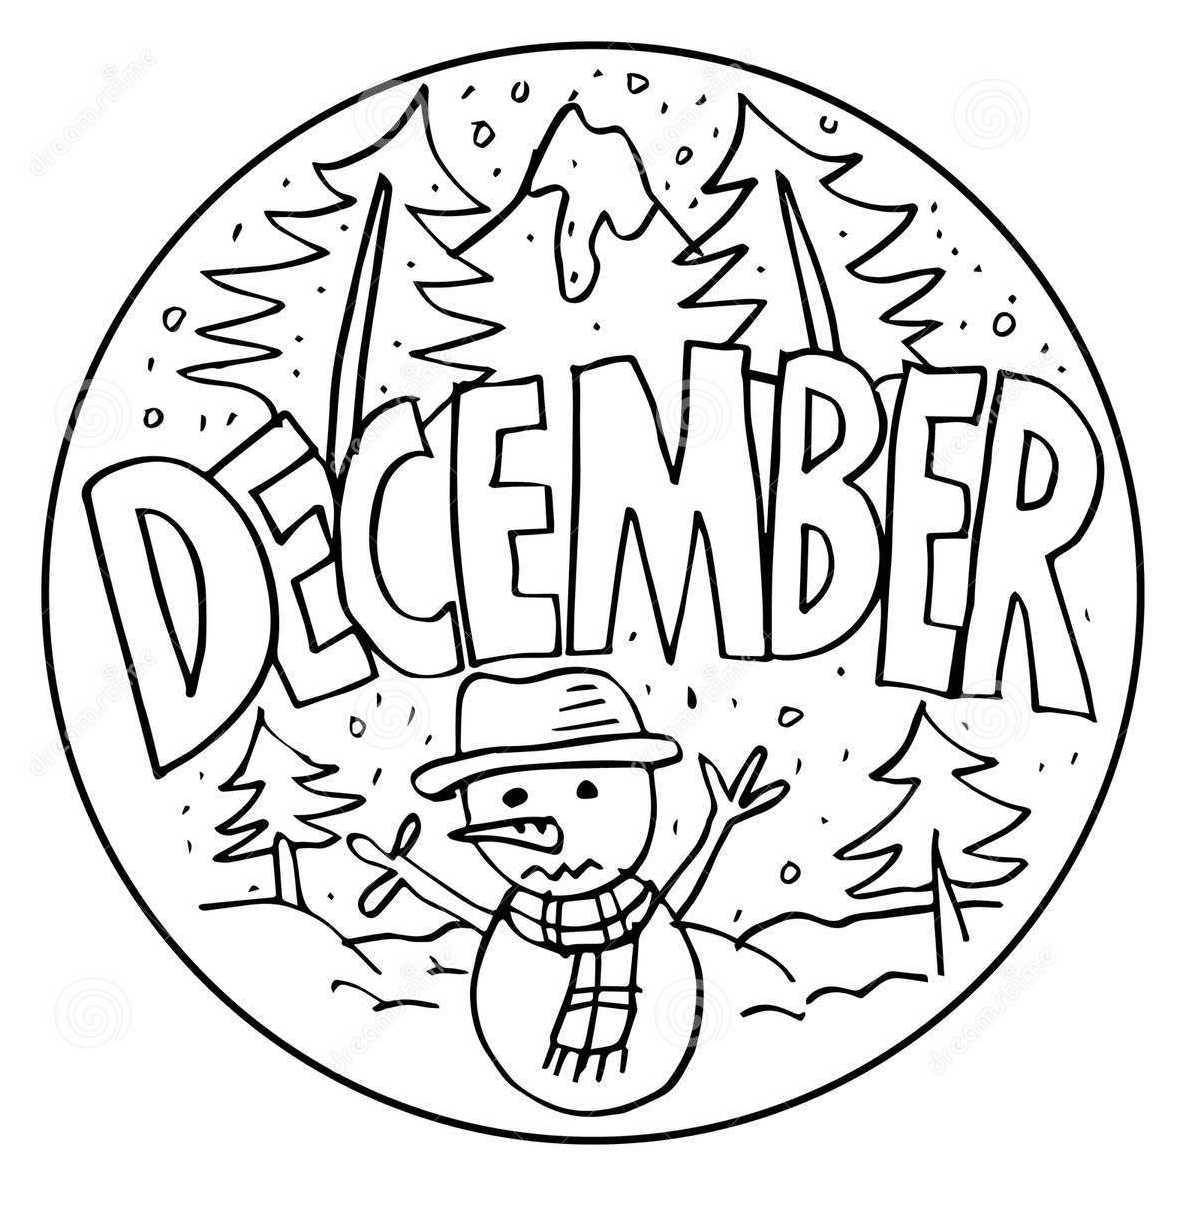 December with Snowman Coloring Page